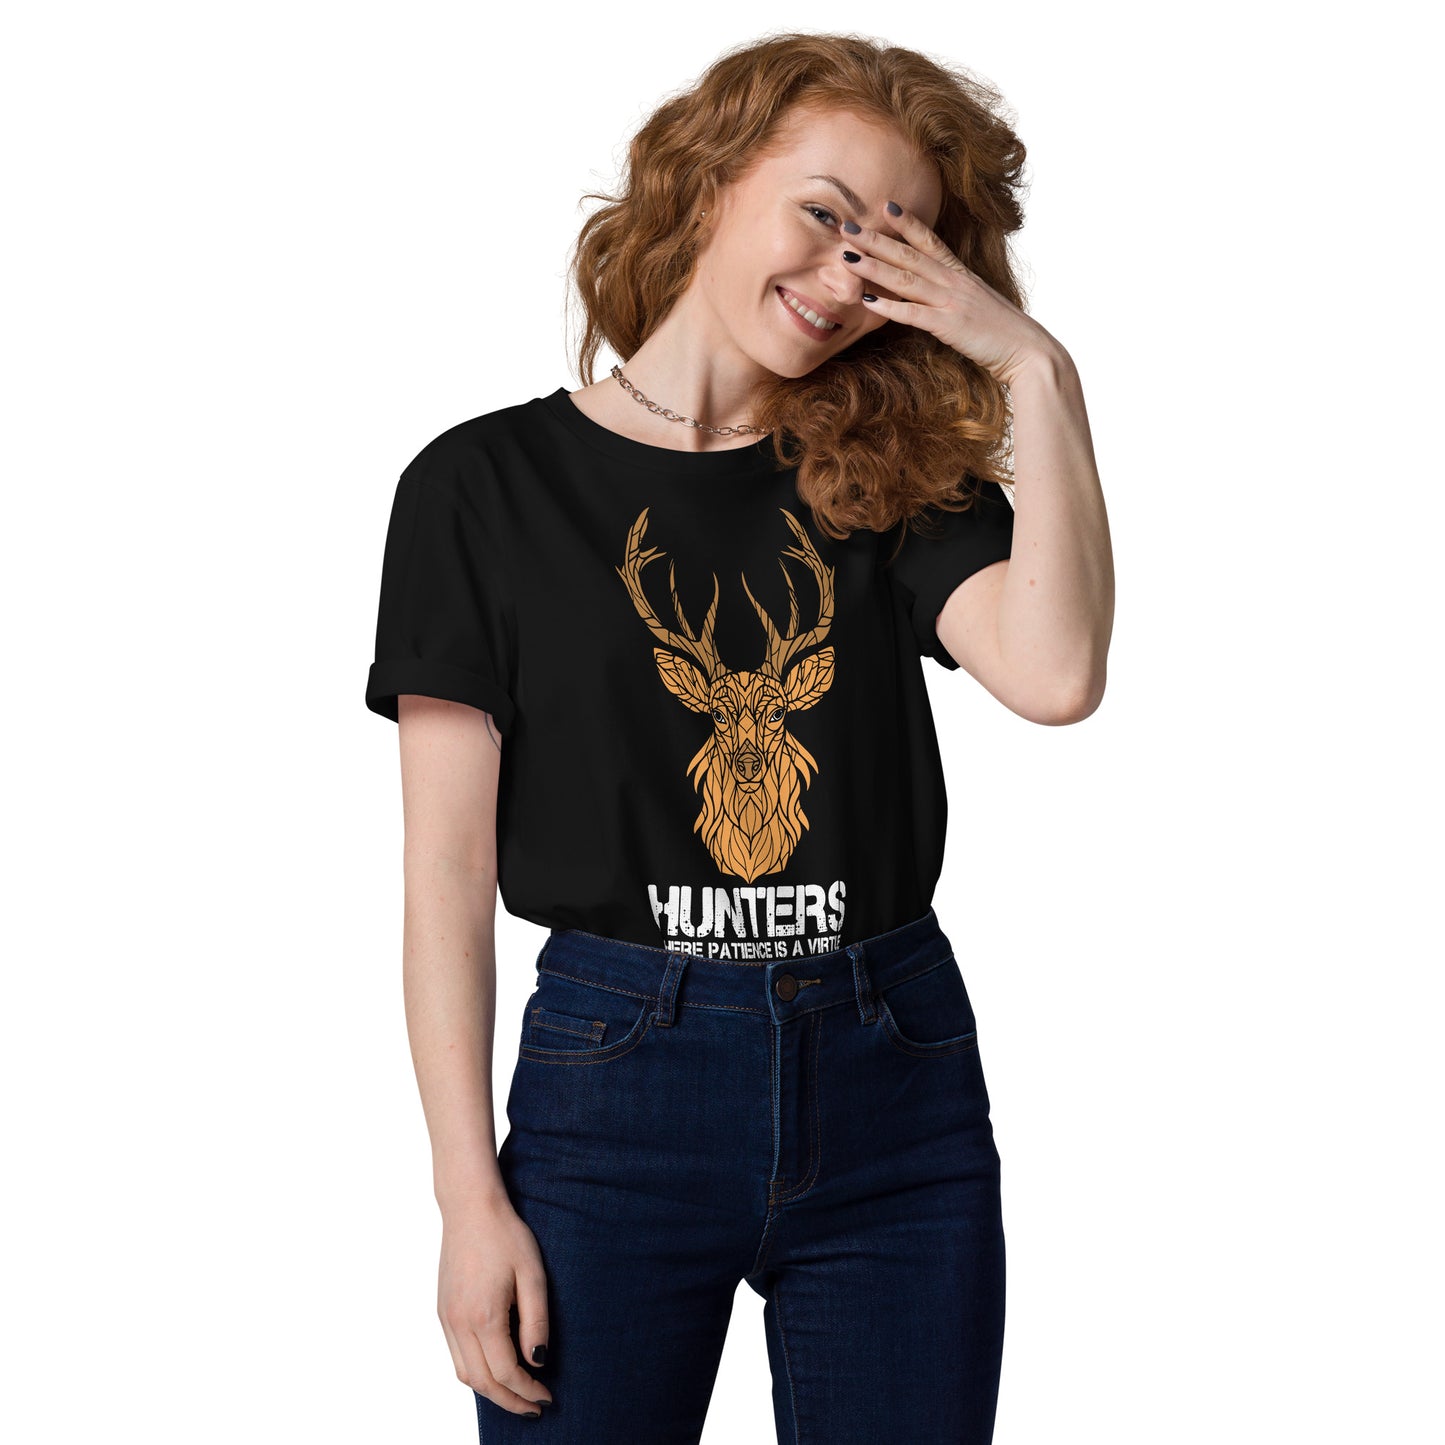 Hunters where Patience is a virtue and Peristence pays off Bio-Baumwoll-T-Shirt